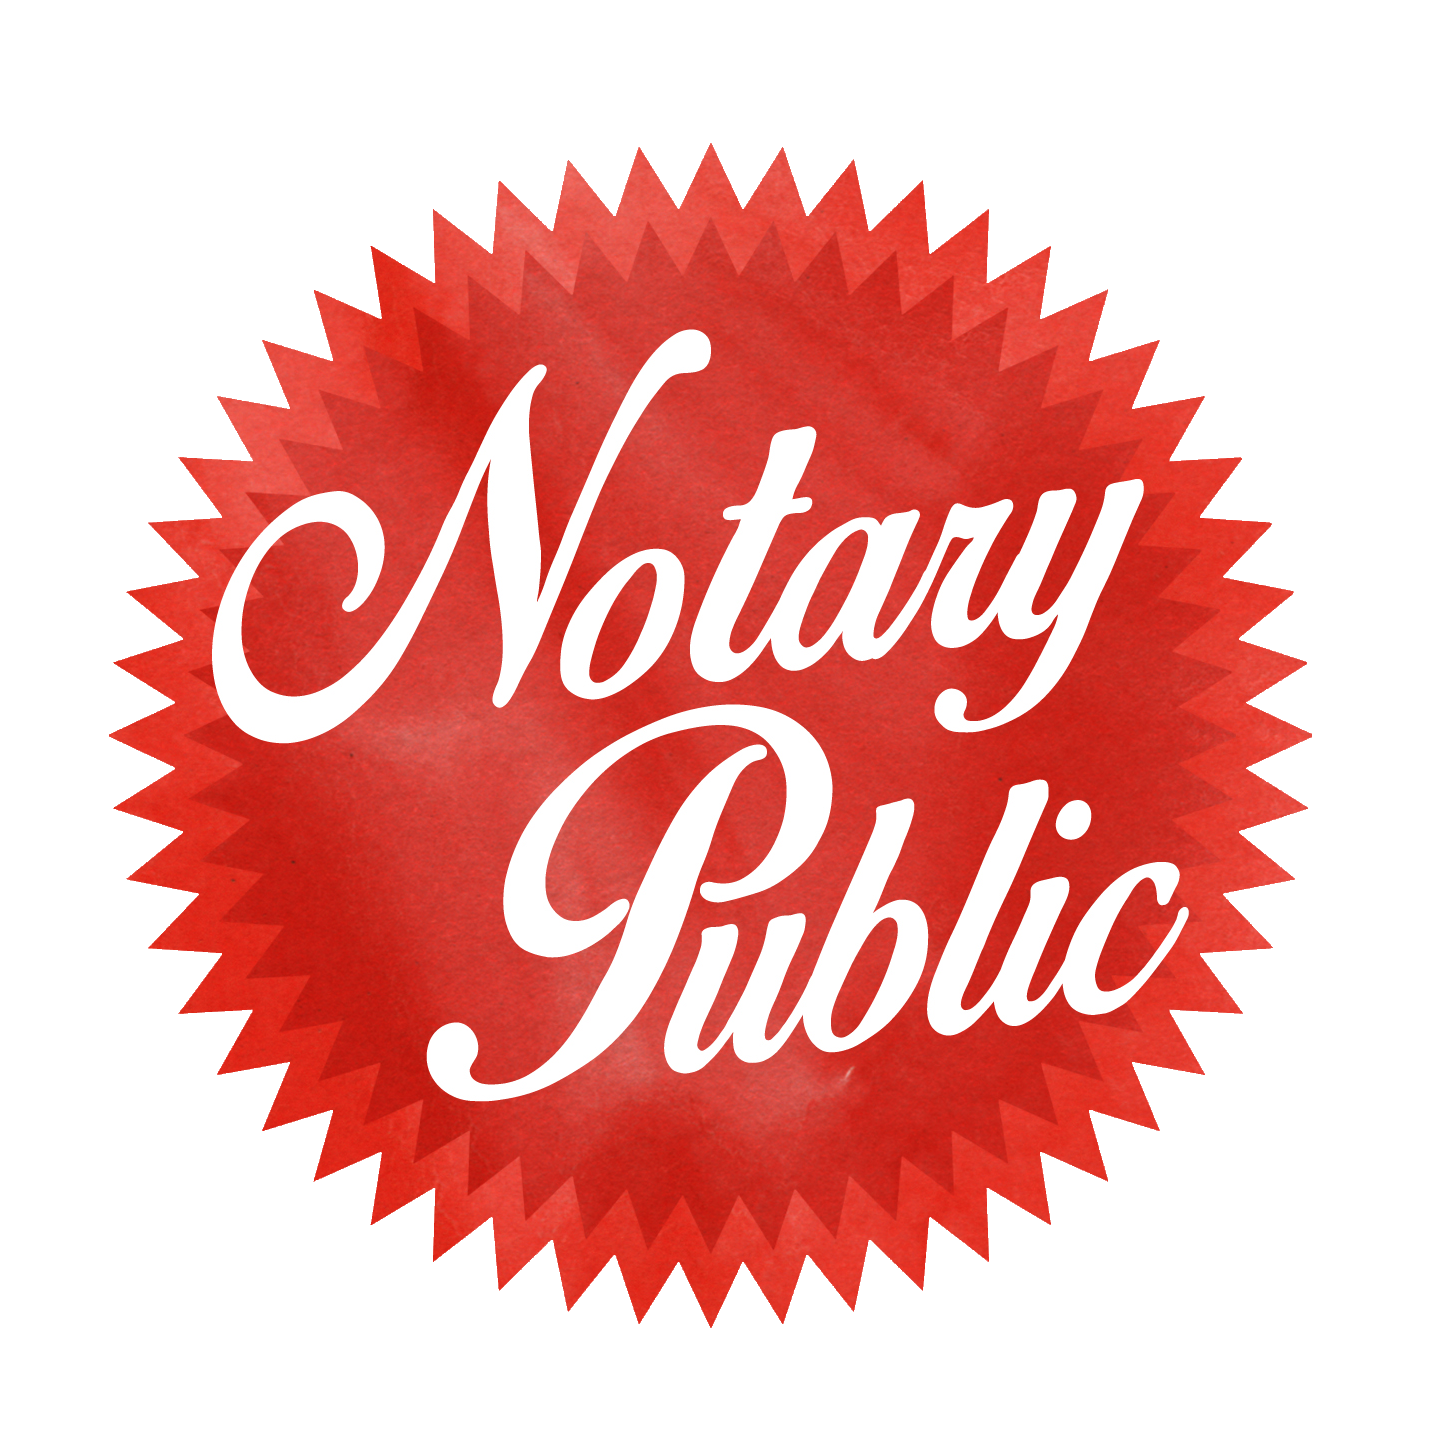 Charles Guthrie Solicitor & Notary Public Logo